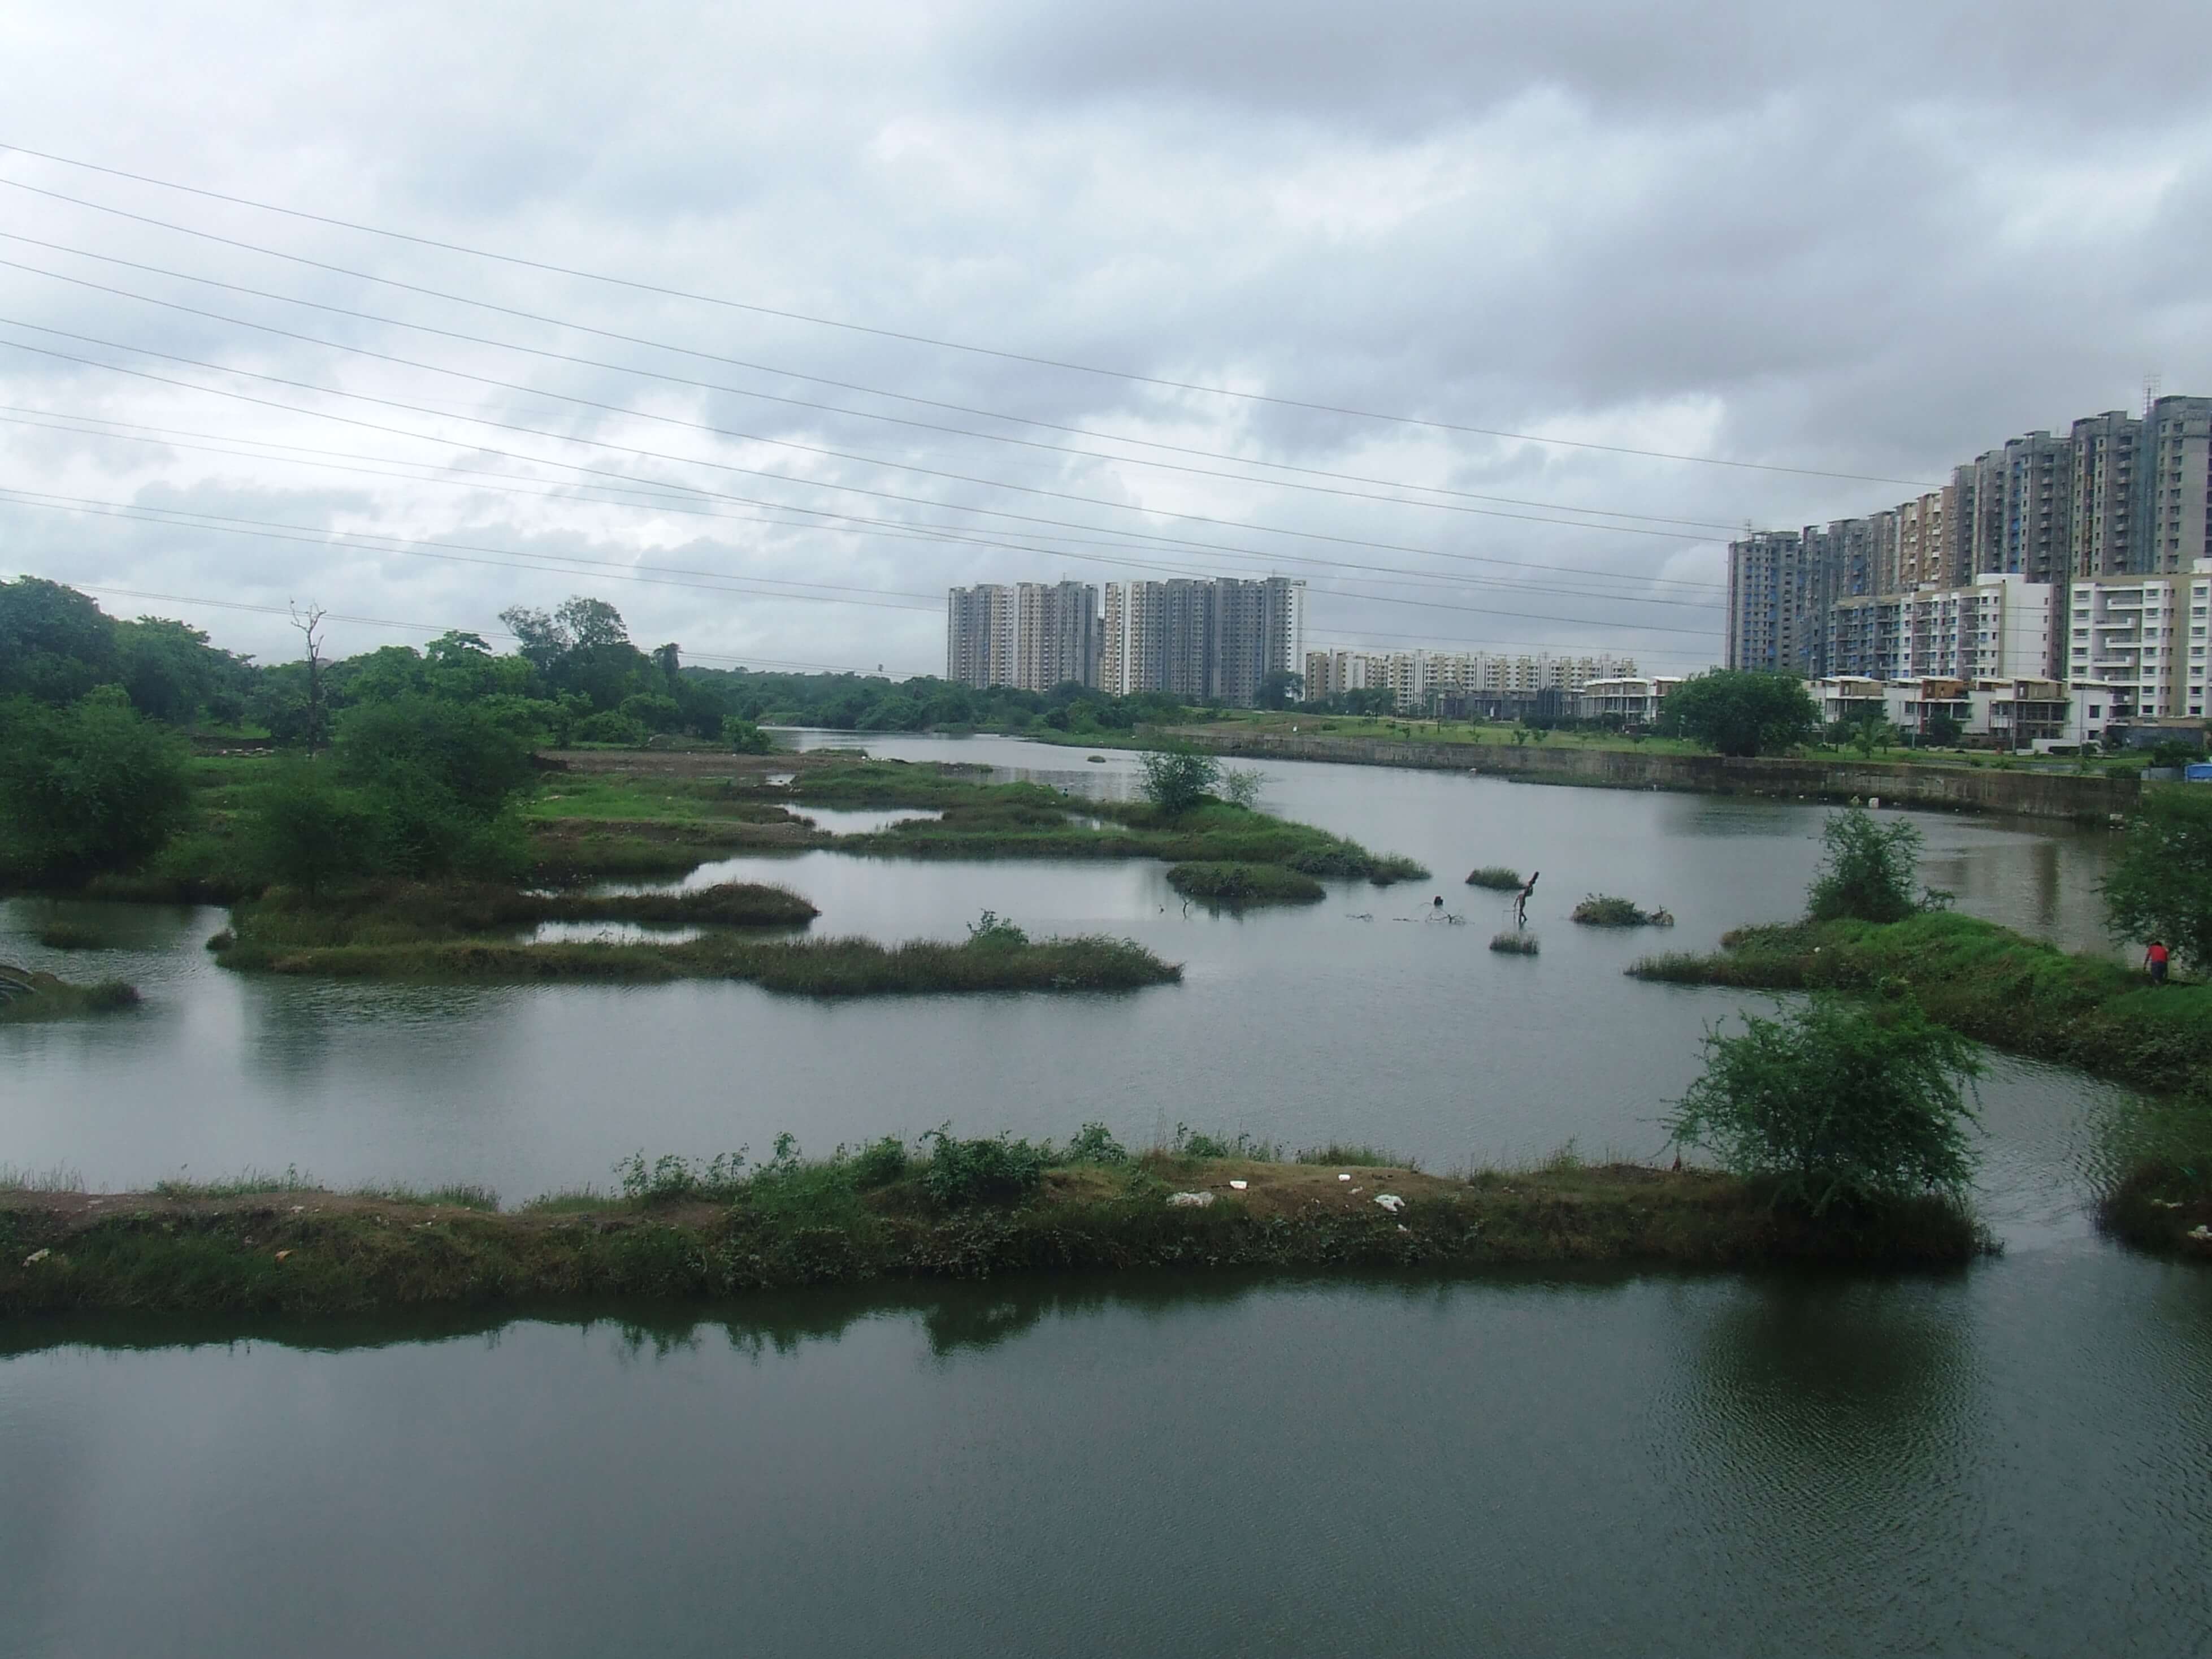 Protection of rivers from pollution